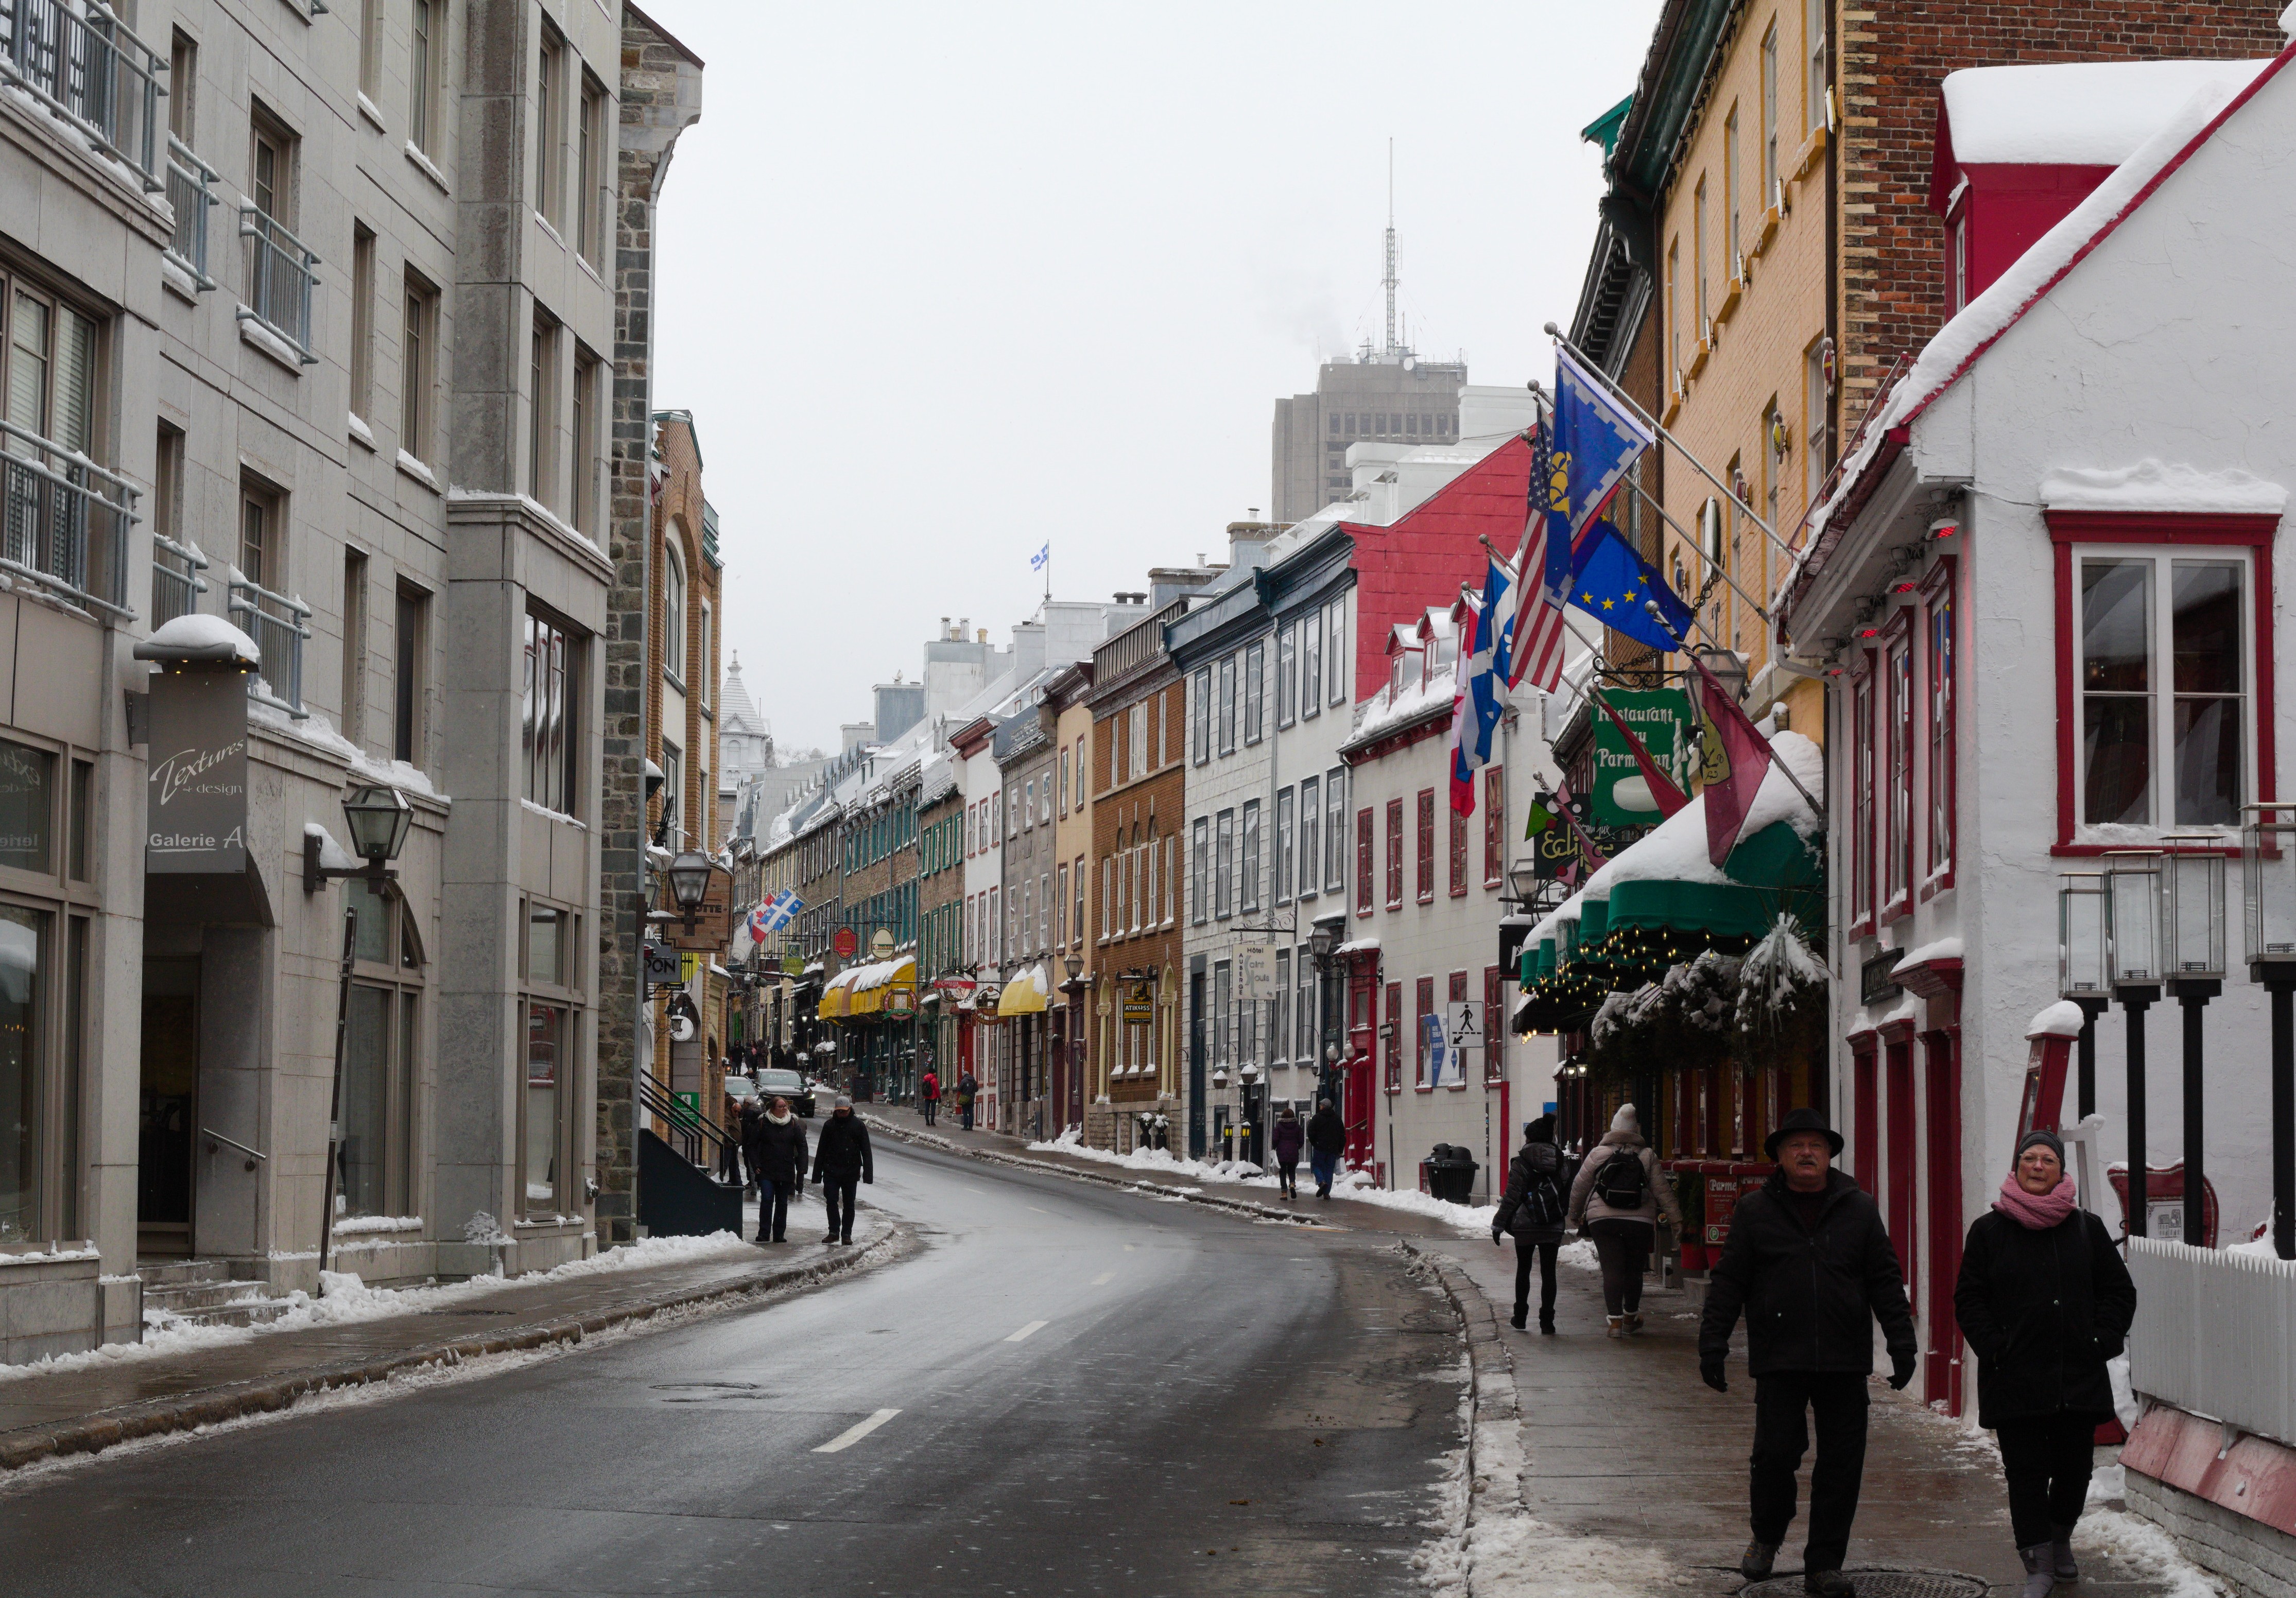 Street lined with colourful buildings; there are traces of snow on the street and sidewalk